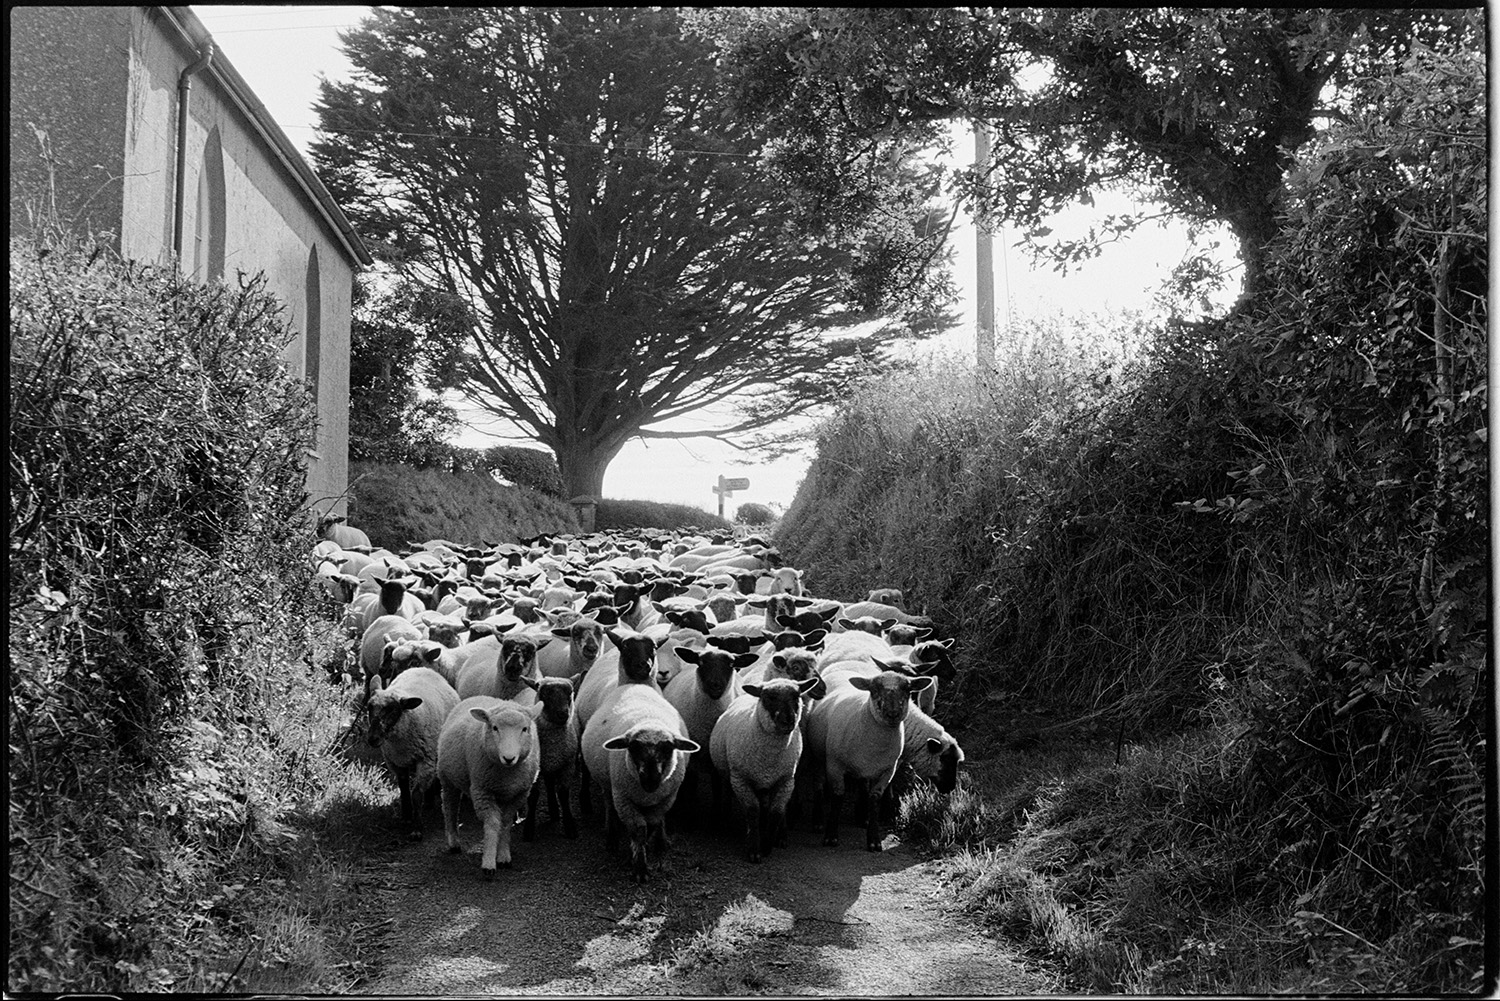 Shepherd taking sheep to new pasture, past old barn, also counting them. 
[A flock of sheep walking along a lane past a chapel at Langham, Dolton, towards new pasture. A signpost can be seen in the background.]